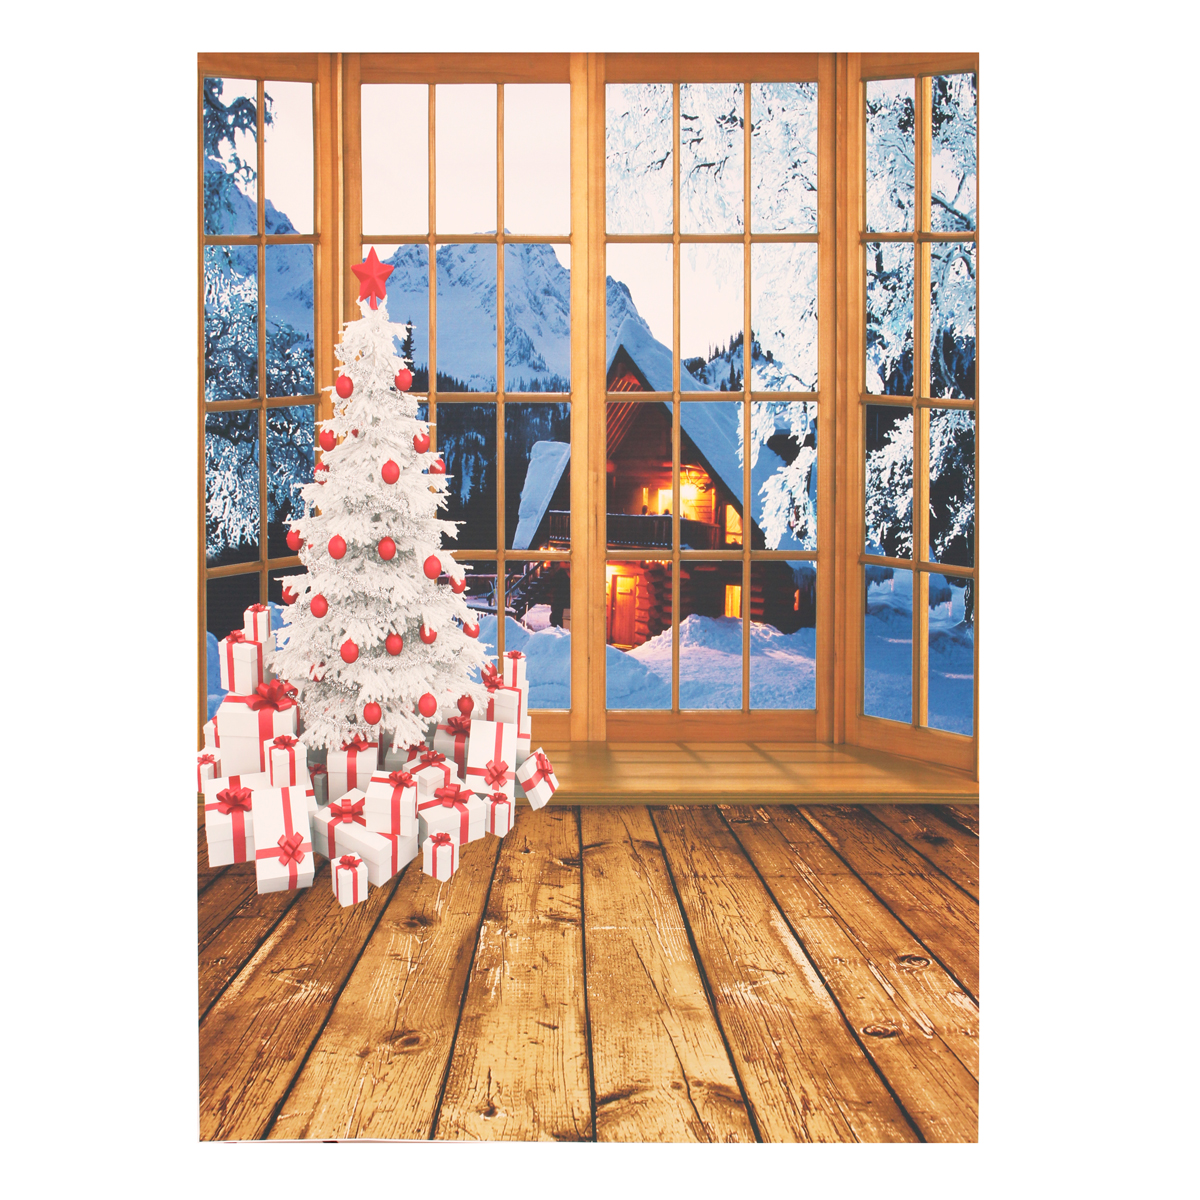 Mohoo-5x7ft-15x21m-Christmas-Backdrop-Photo-Window-Backdrop-with-Wooden-Floor-Christmas-Tree-Snow-Co-1958159-7